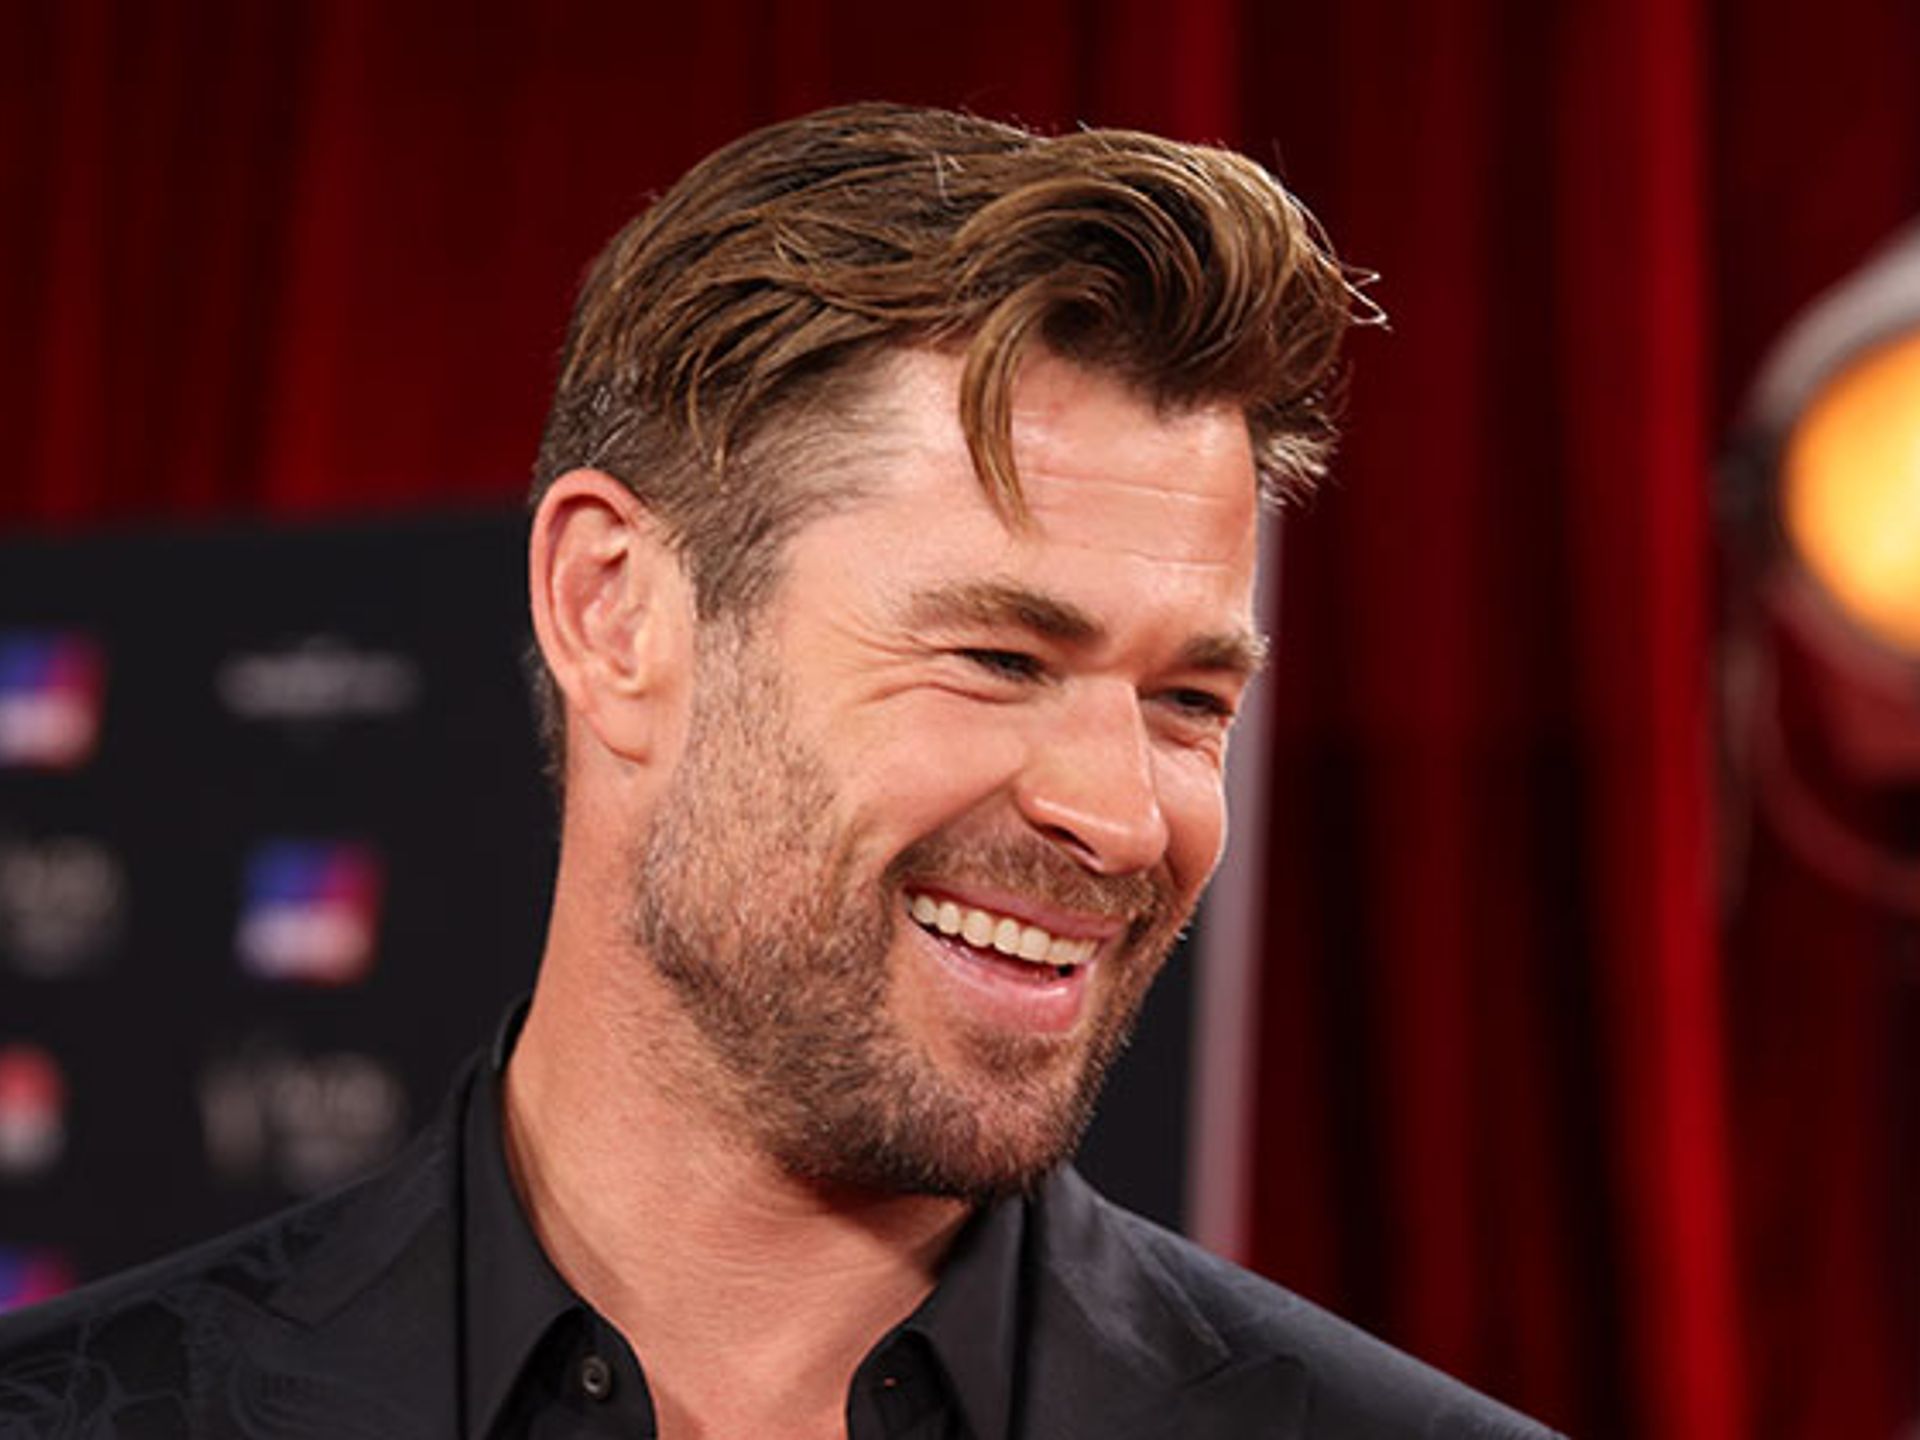 Chris Hemsworth Shows 'How Babies Are Made' in Valentine's Day Video